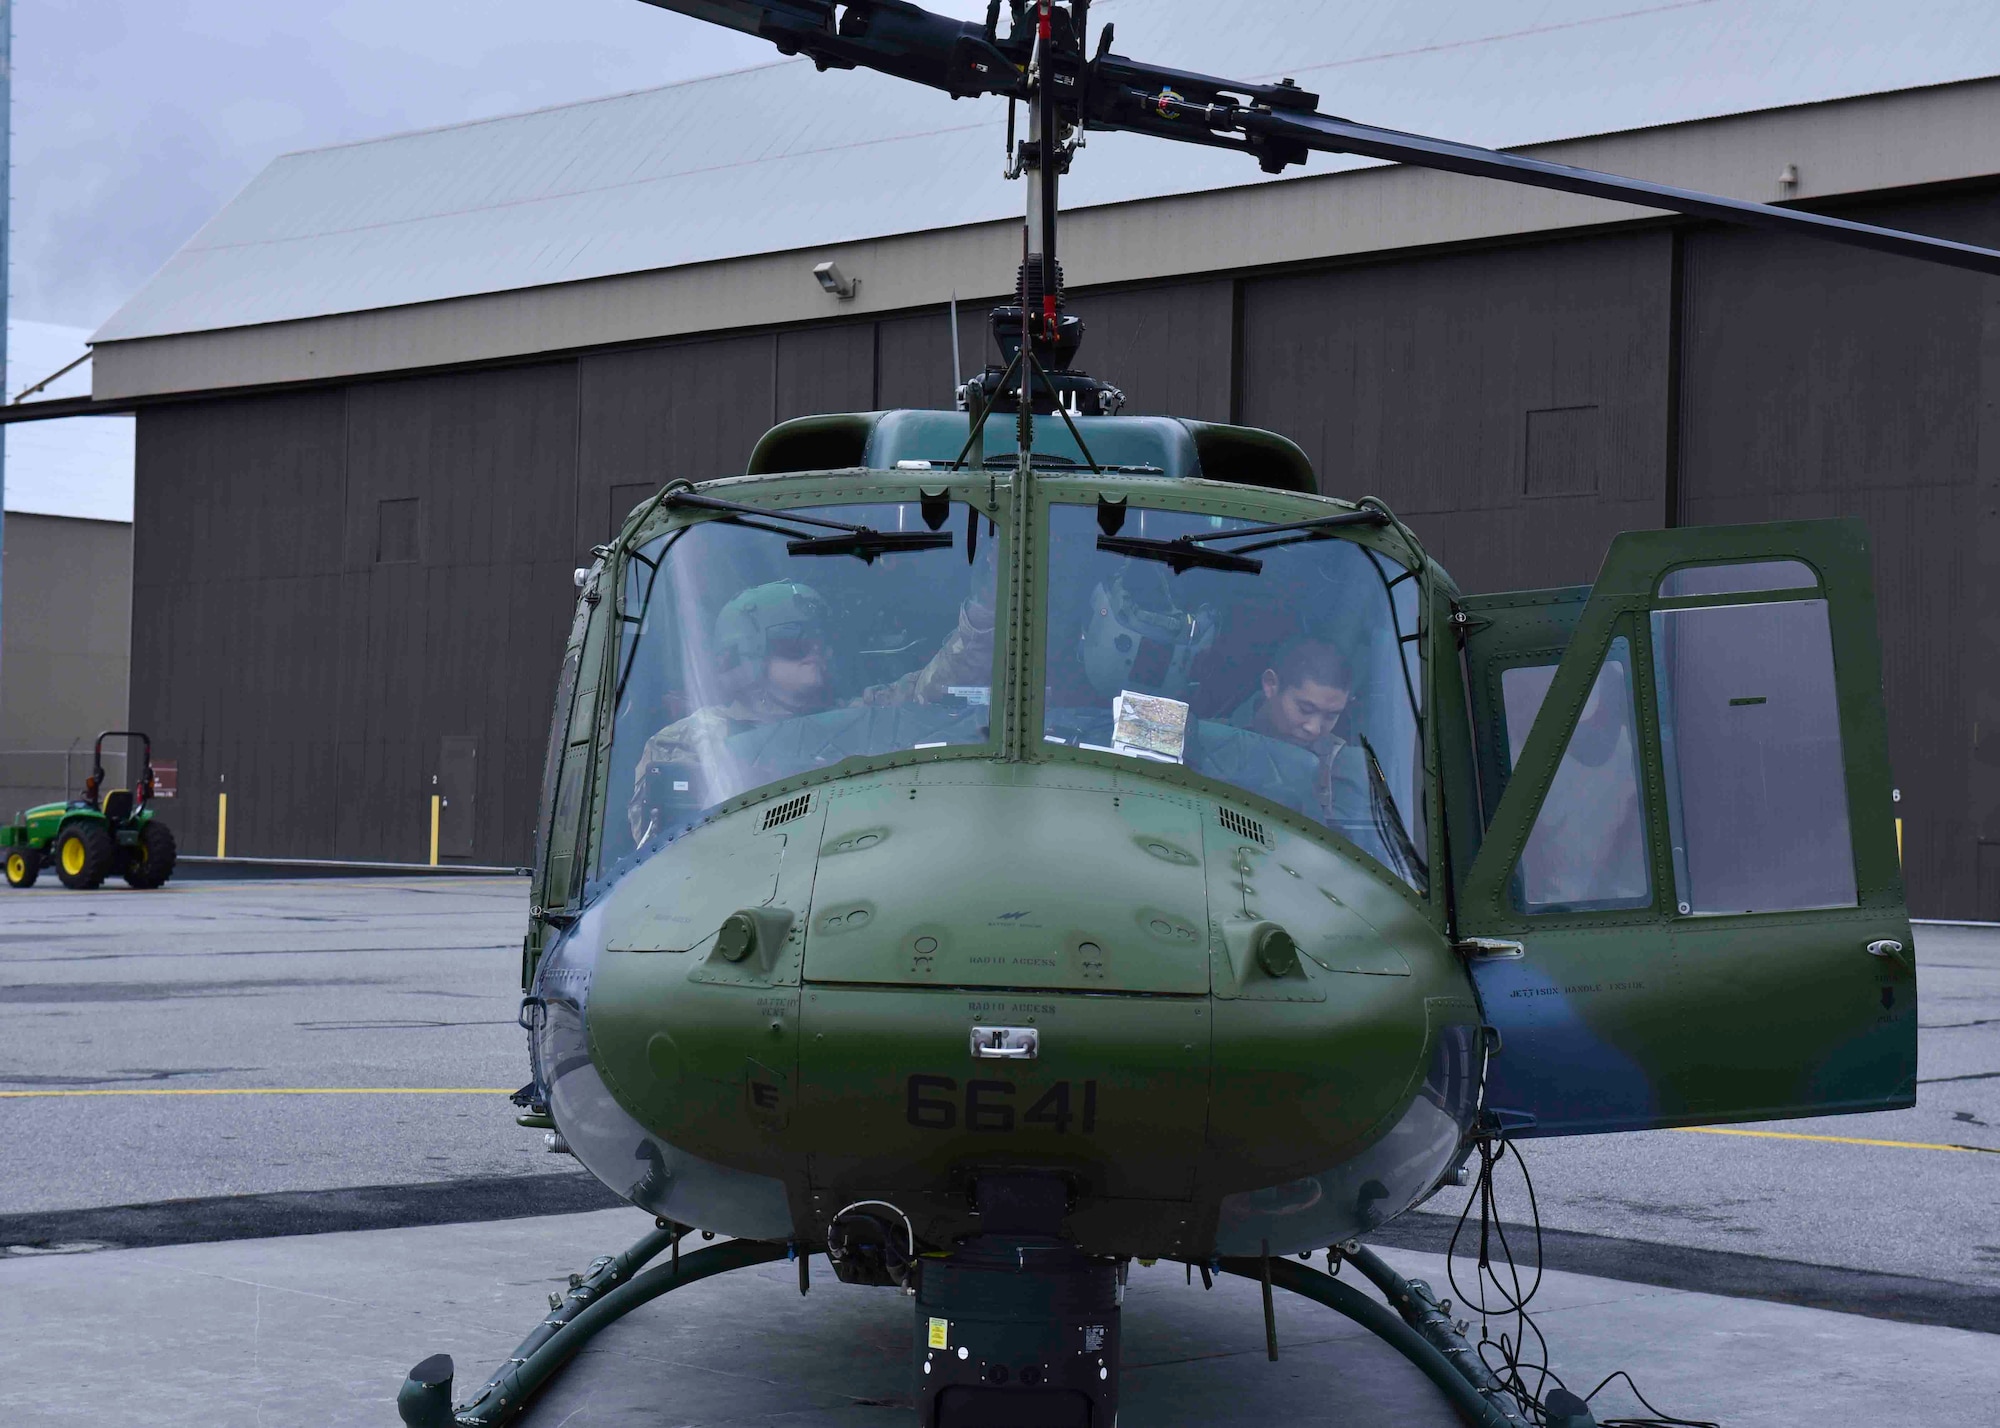 U.S. Air Force Capt. Joel Lewis, 36th Rescue Squadron executive officer, and 1st Lt. Daniel Iwata, 36th RQS chief of scheduling, prepare for takeoff in a Bell UH-1N Iroquois helicopter at Fairchild Air Force Base, Washington, Jan. 30, 2020. The UH-1N is categorized as the utility helicopter in the Air Force due to its versatility. (U.S. Air Force by Airman 1st Class Kiaundra Miller)